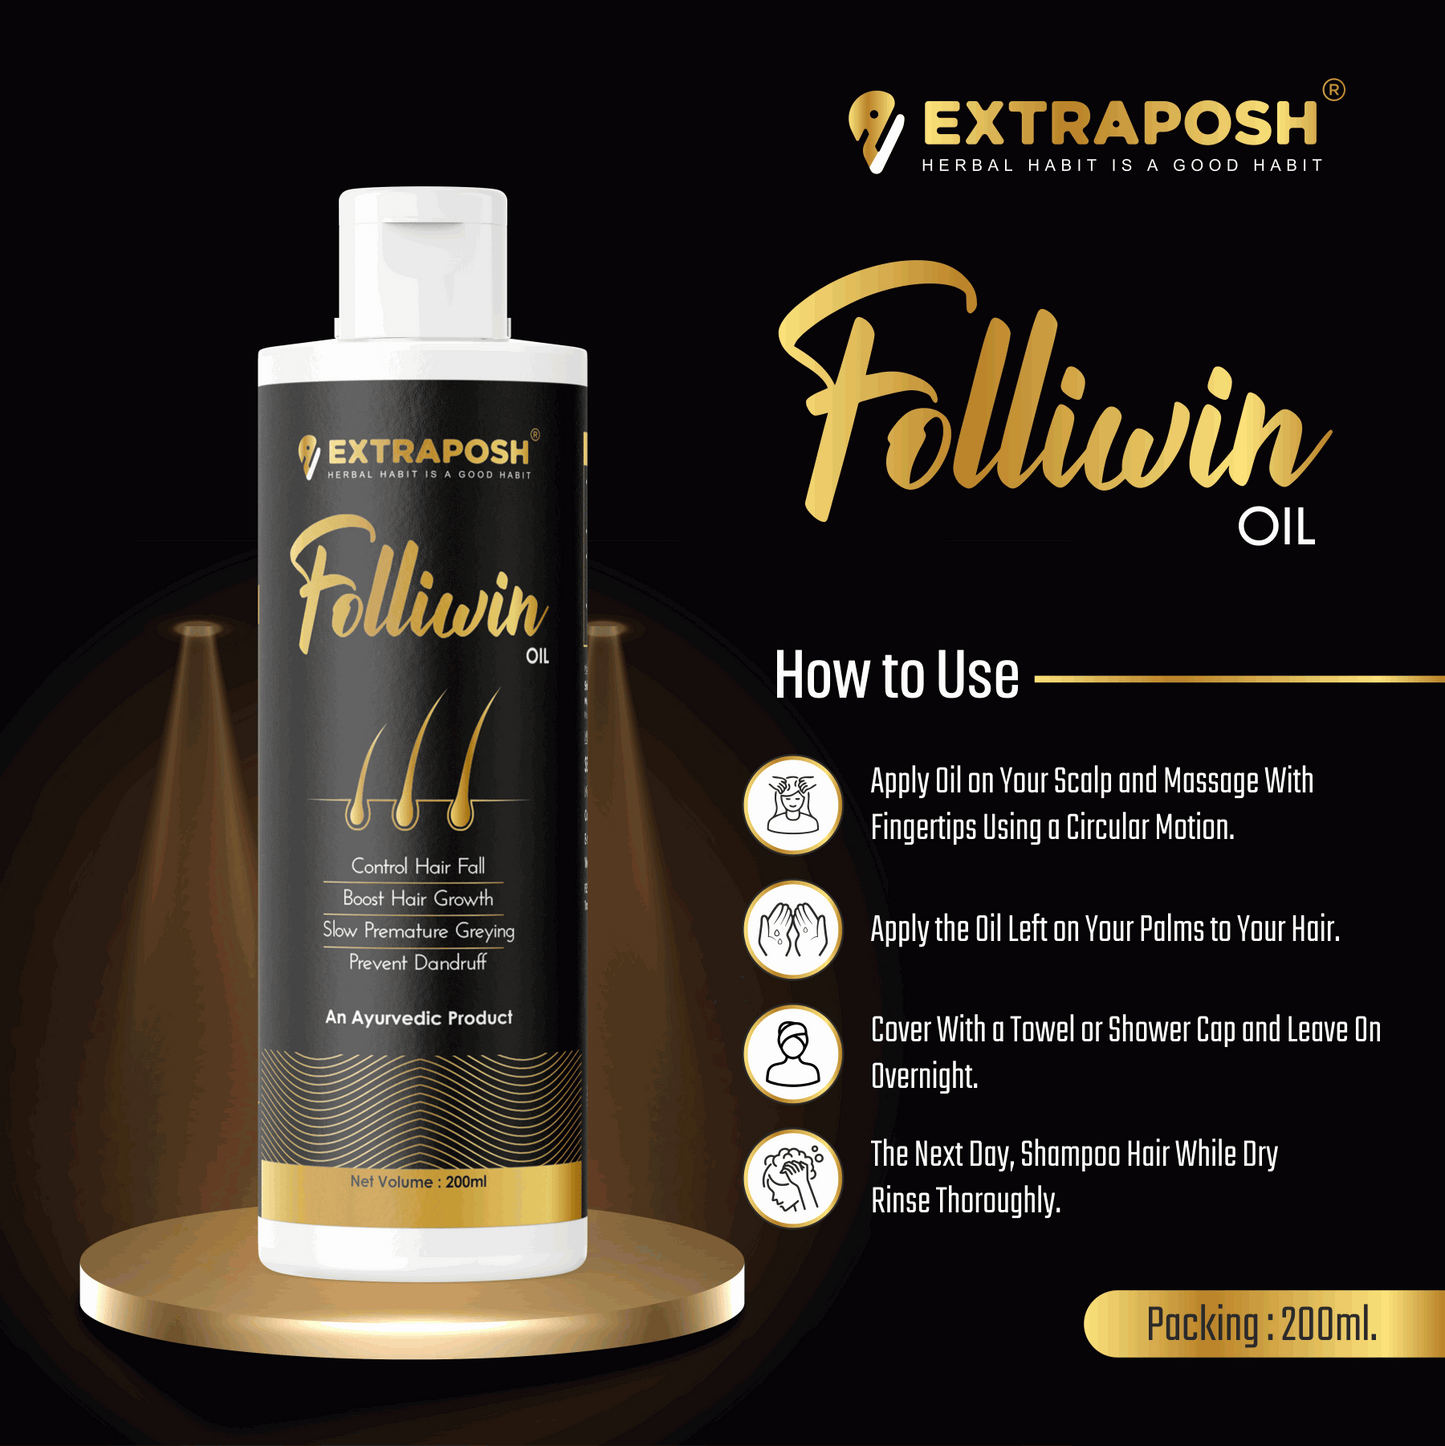 Apply Folliwin hair oil pn ypur scalp and massage with fingers using a circular motion next day shampoo hair while dry rinse thoroughly